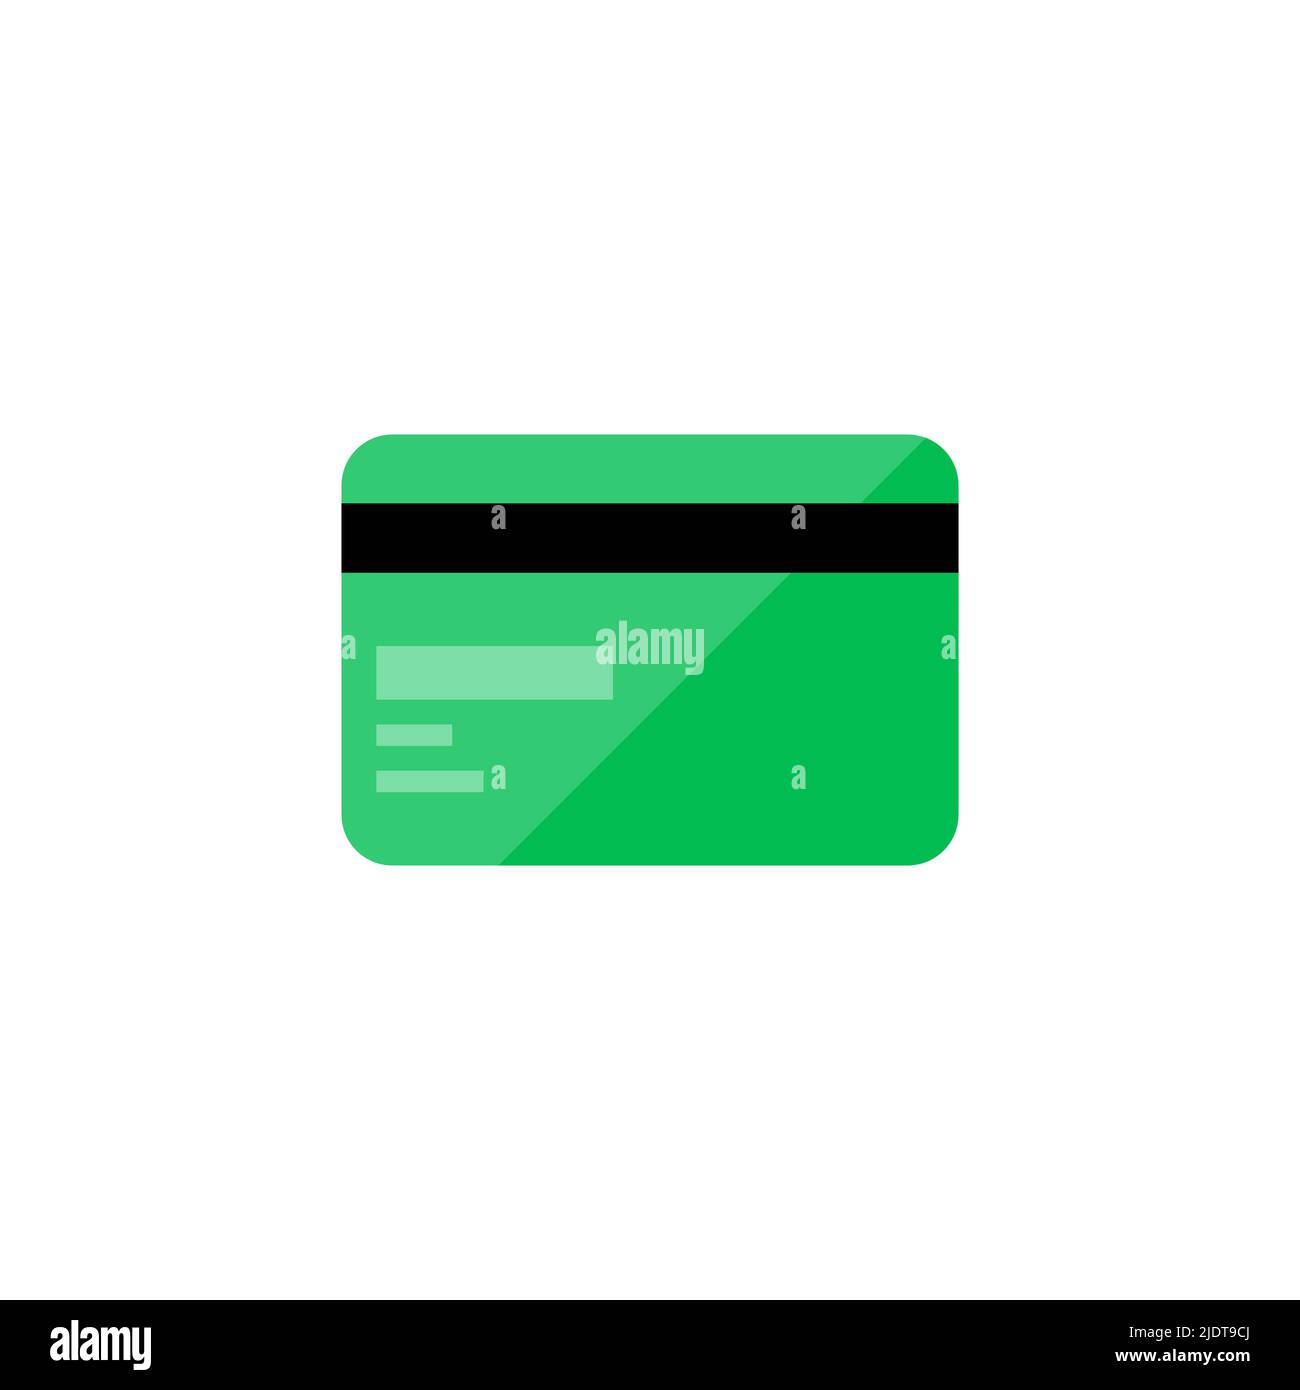 Credit bank card colored vector illustration. Trendy flat icon isolated pay symbol, sign can be used for: payment logo, mobile, app, emblem, design, w Stock Photo